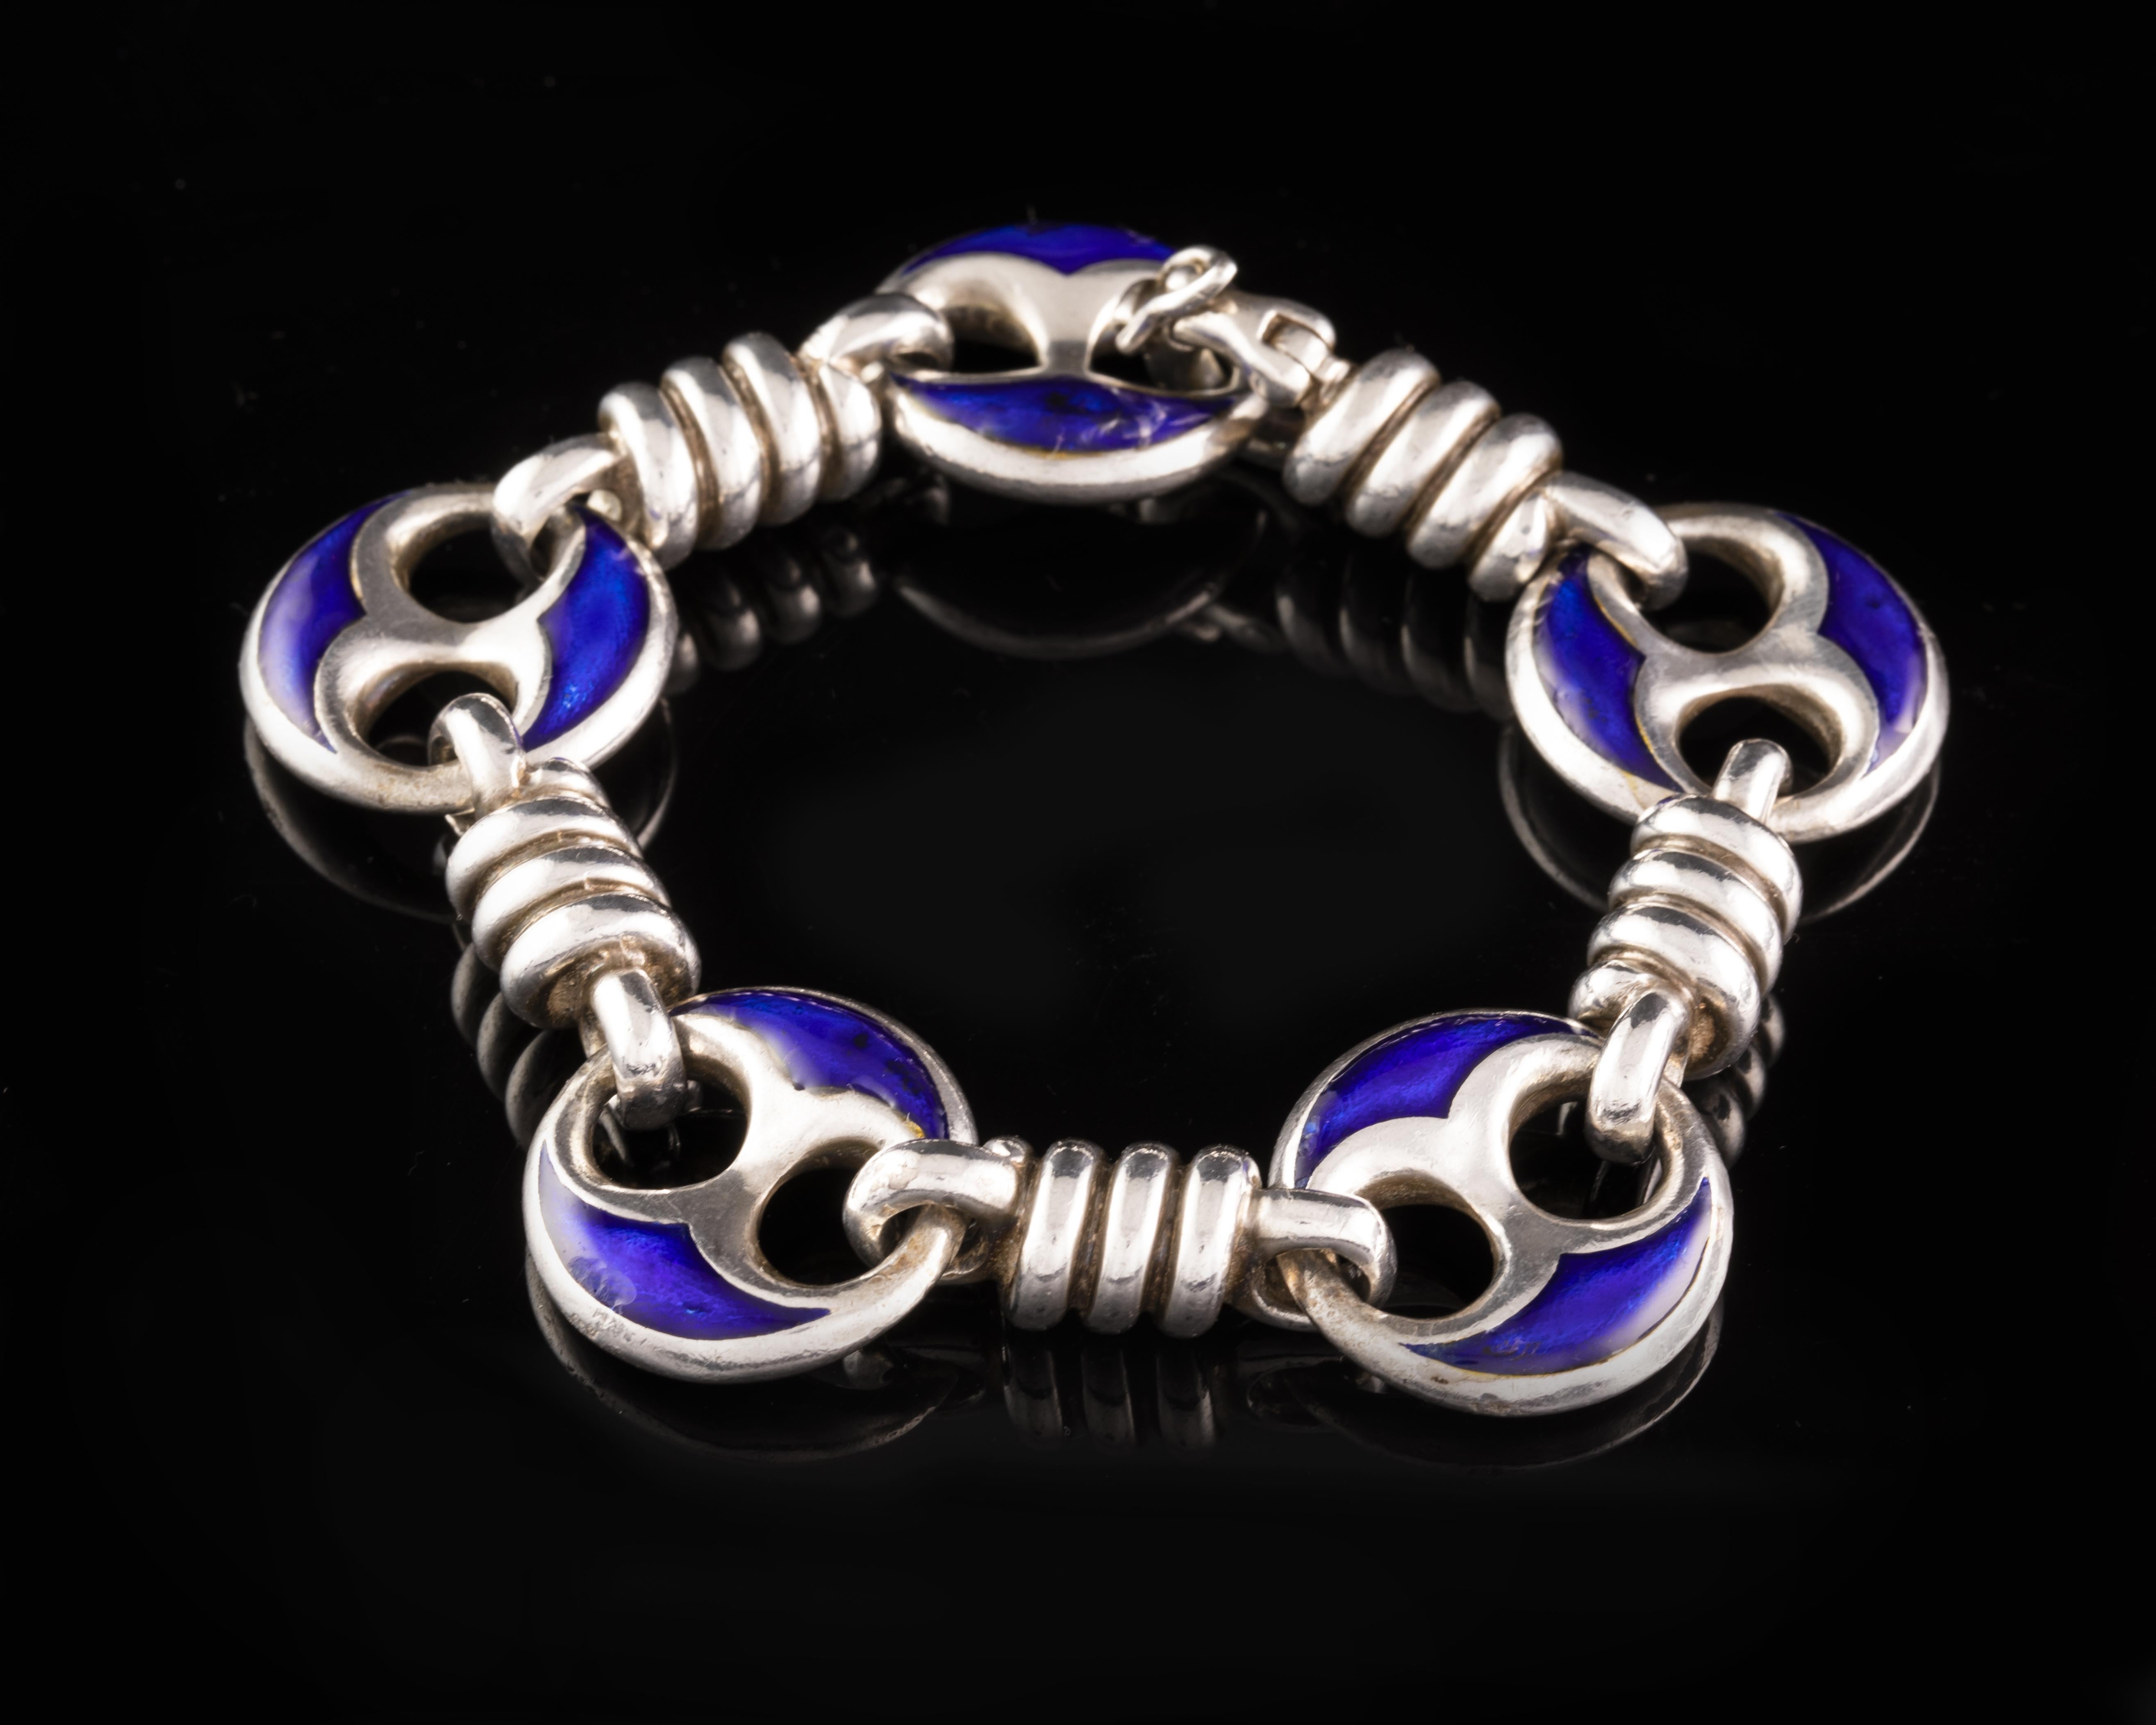 A double face sterling silver and blue enamel bracelet by Gucci. It features the renowned marine links. Signed GUCCI ITALY on reverse and stamped 925. You can wear it in two different versions with or without enamel.
